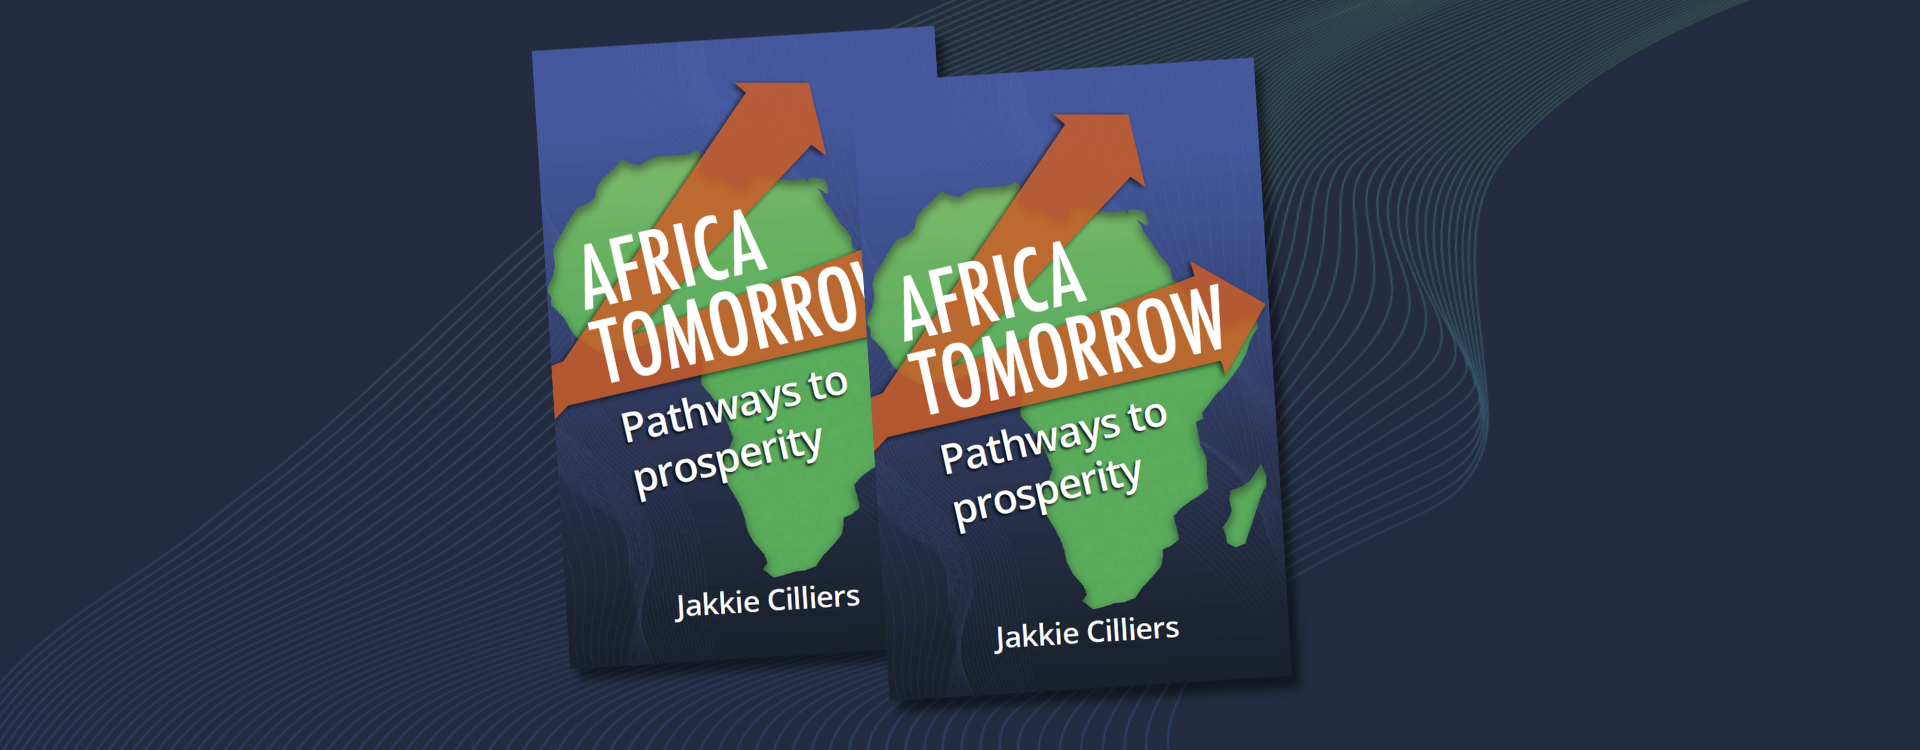 Launch and discussion: Africa tomorrow – pathways to prosperity